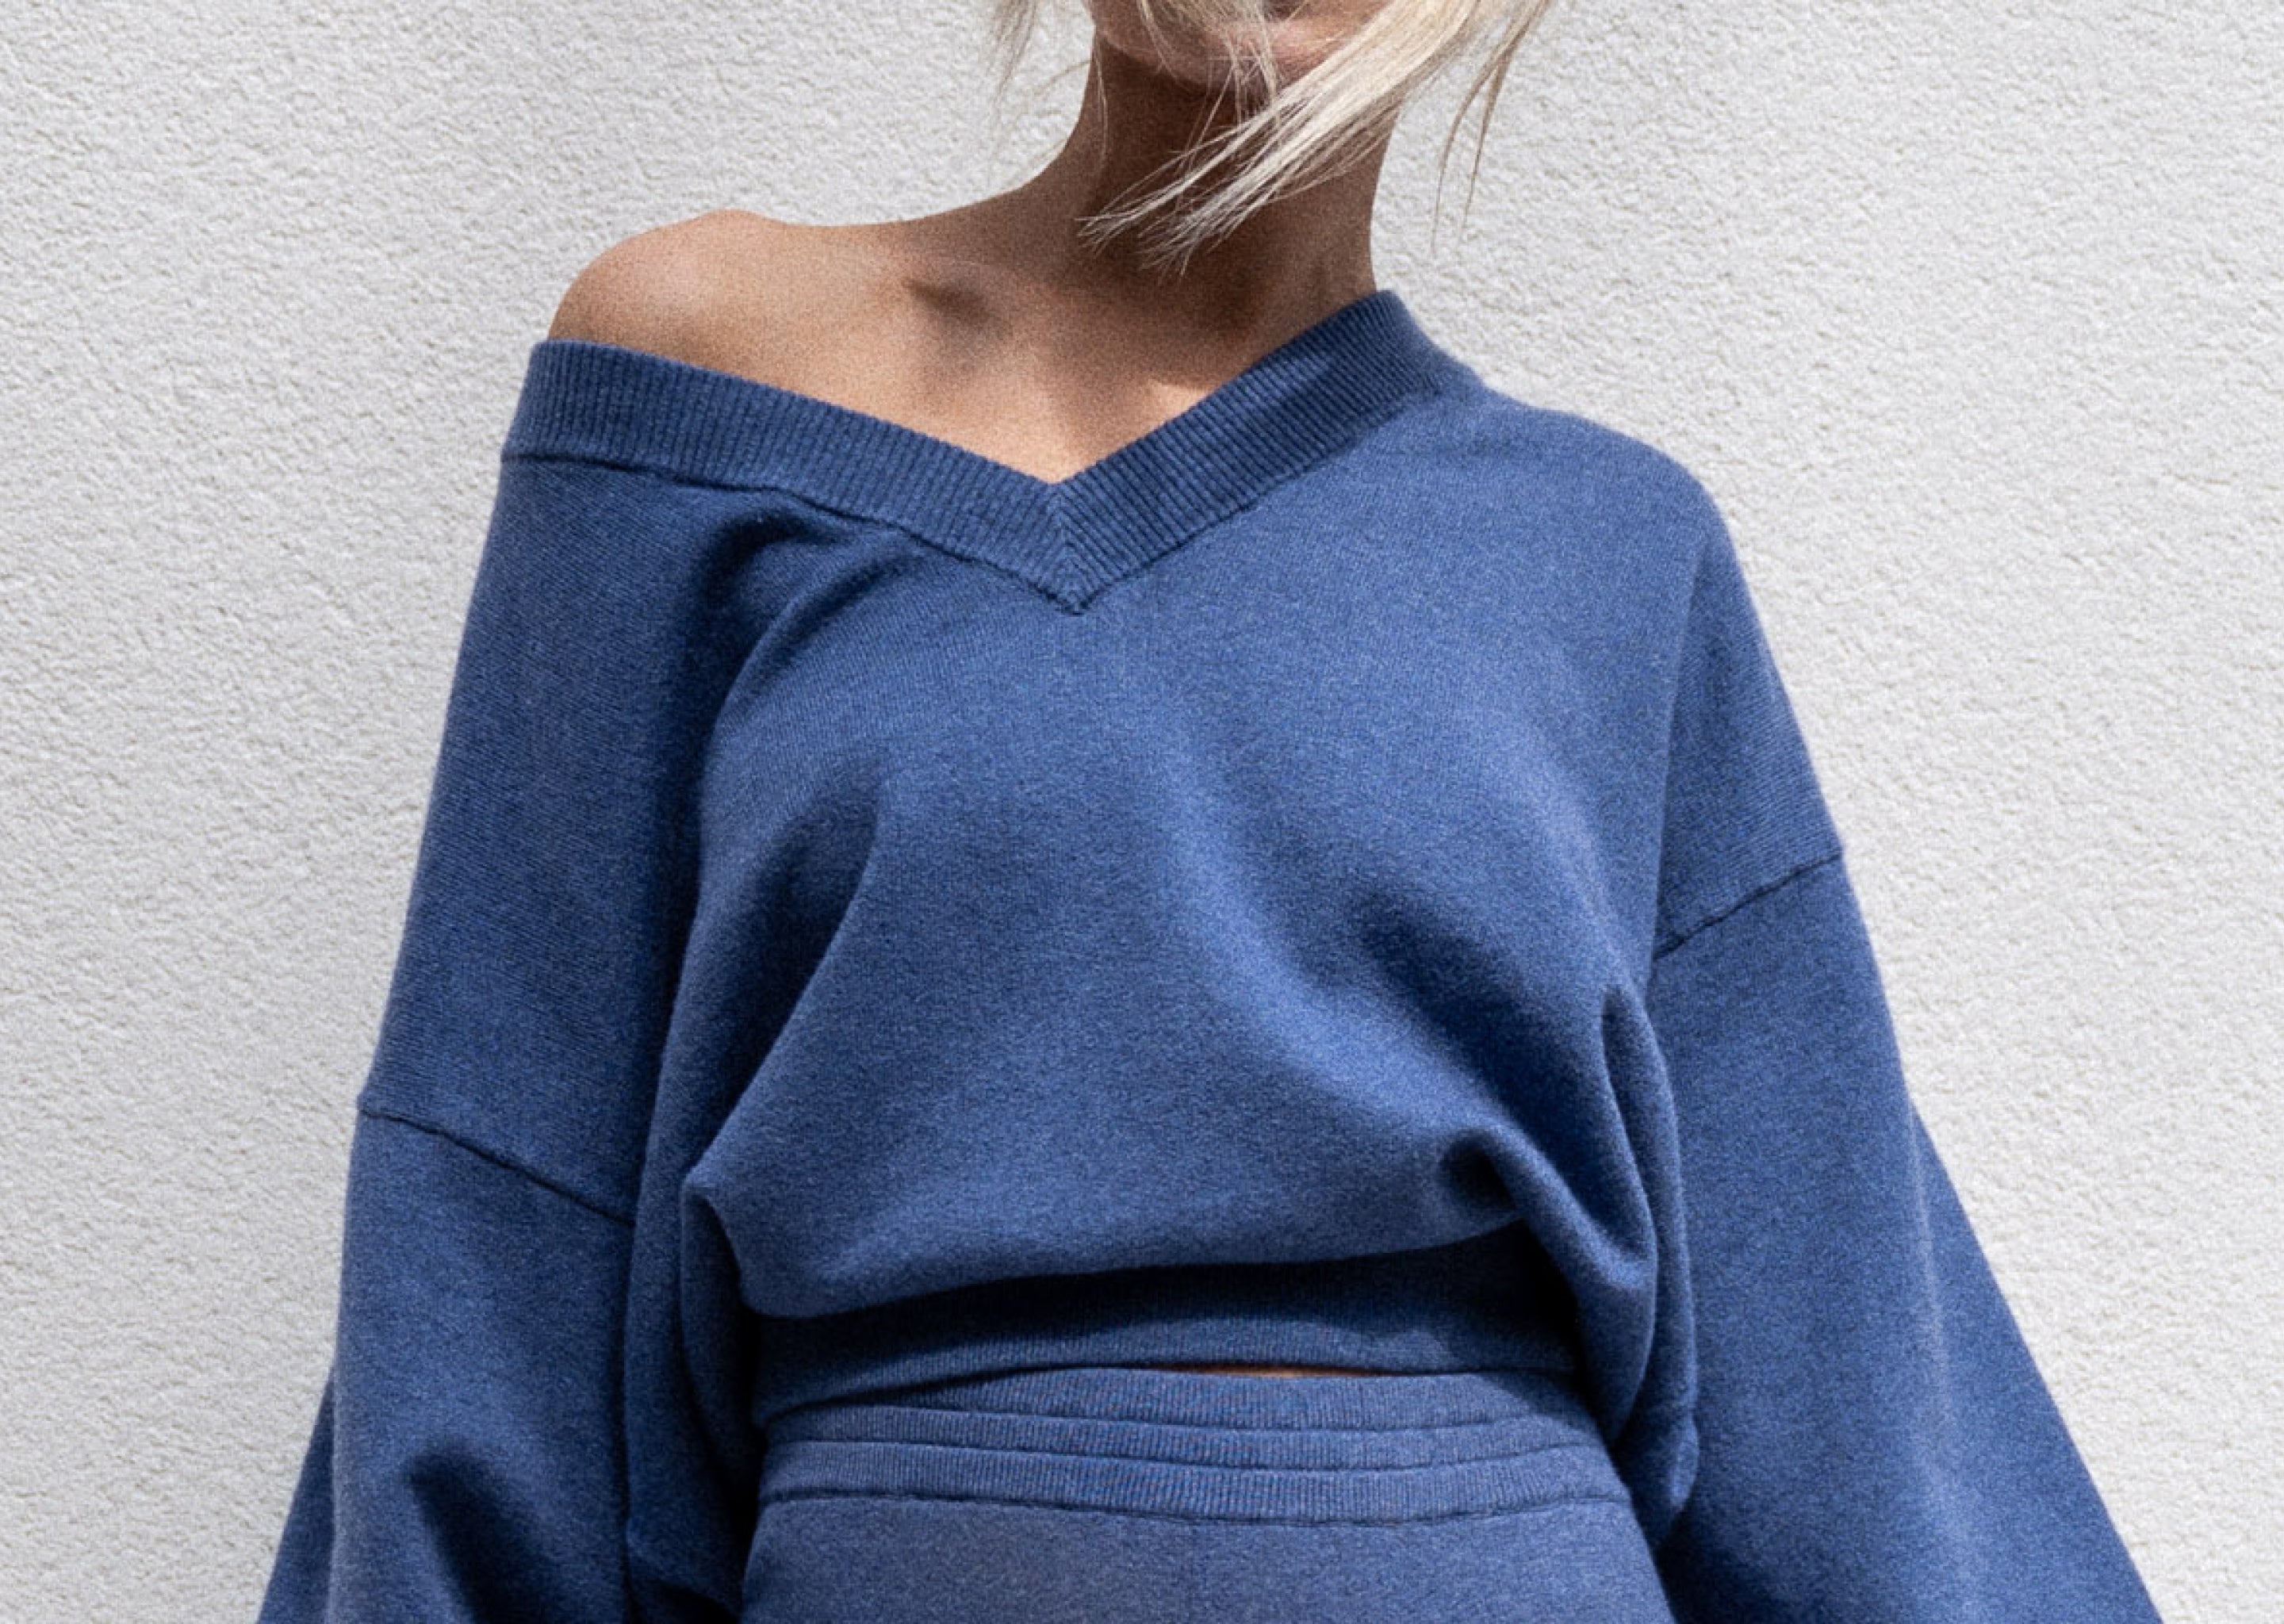 NakedCashmere | 100% Cashmere Direct to You